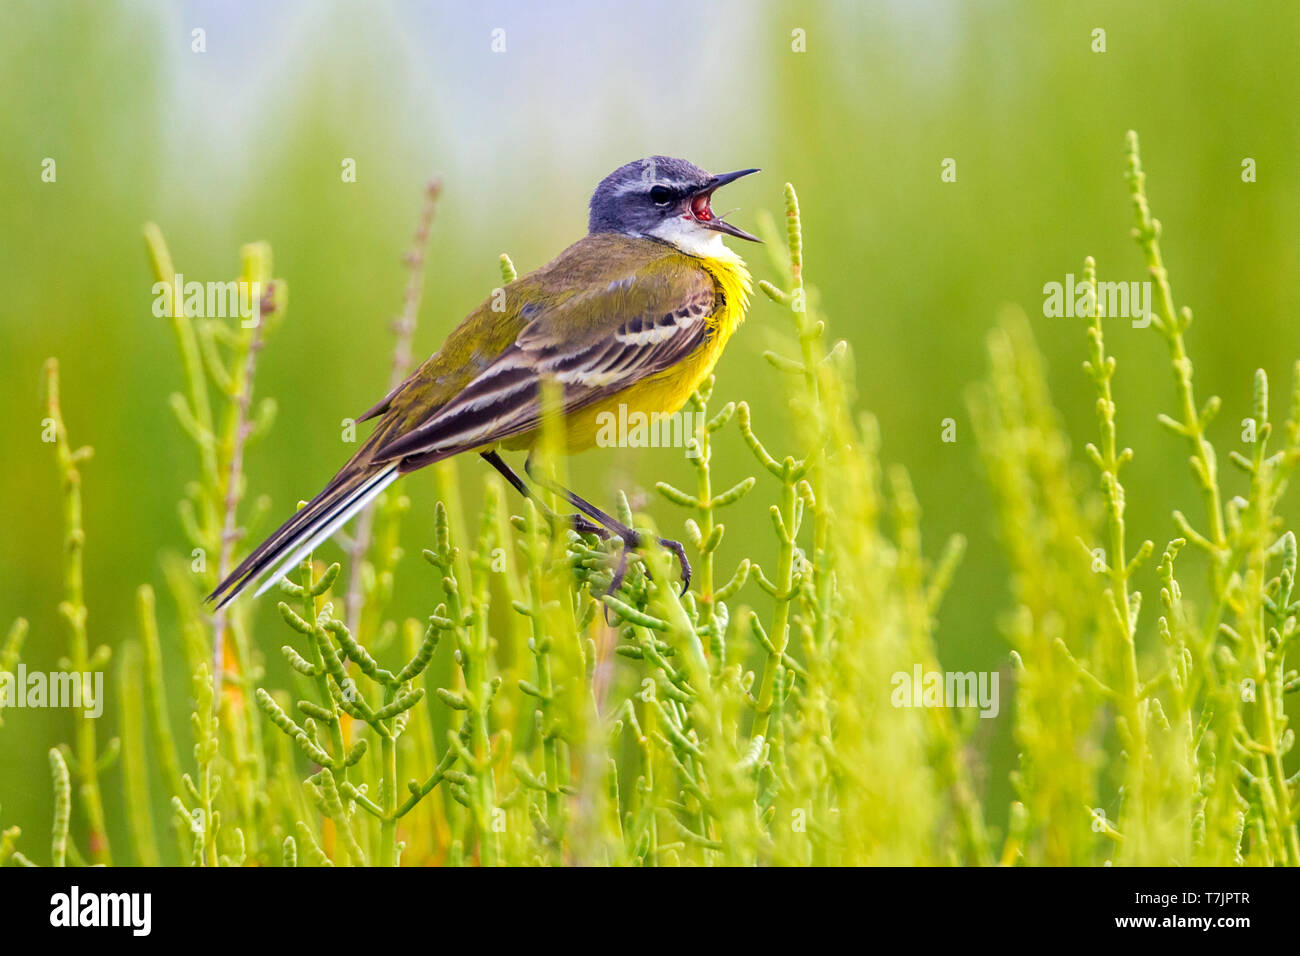 Adult singing male Iberian Yellow Wagtail (Motacilla flava iberiae), perched and singing on salicorne plant in breeding grounds, Ebro Delta, Spain. Stock Photo